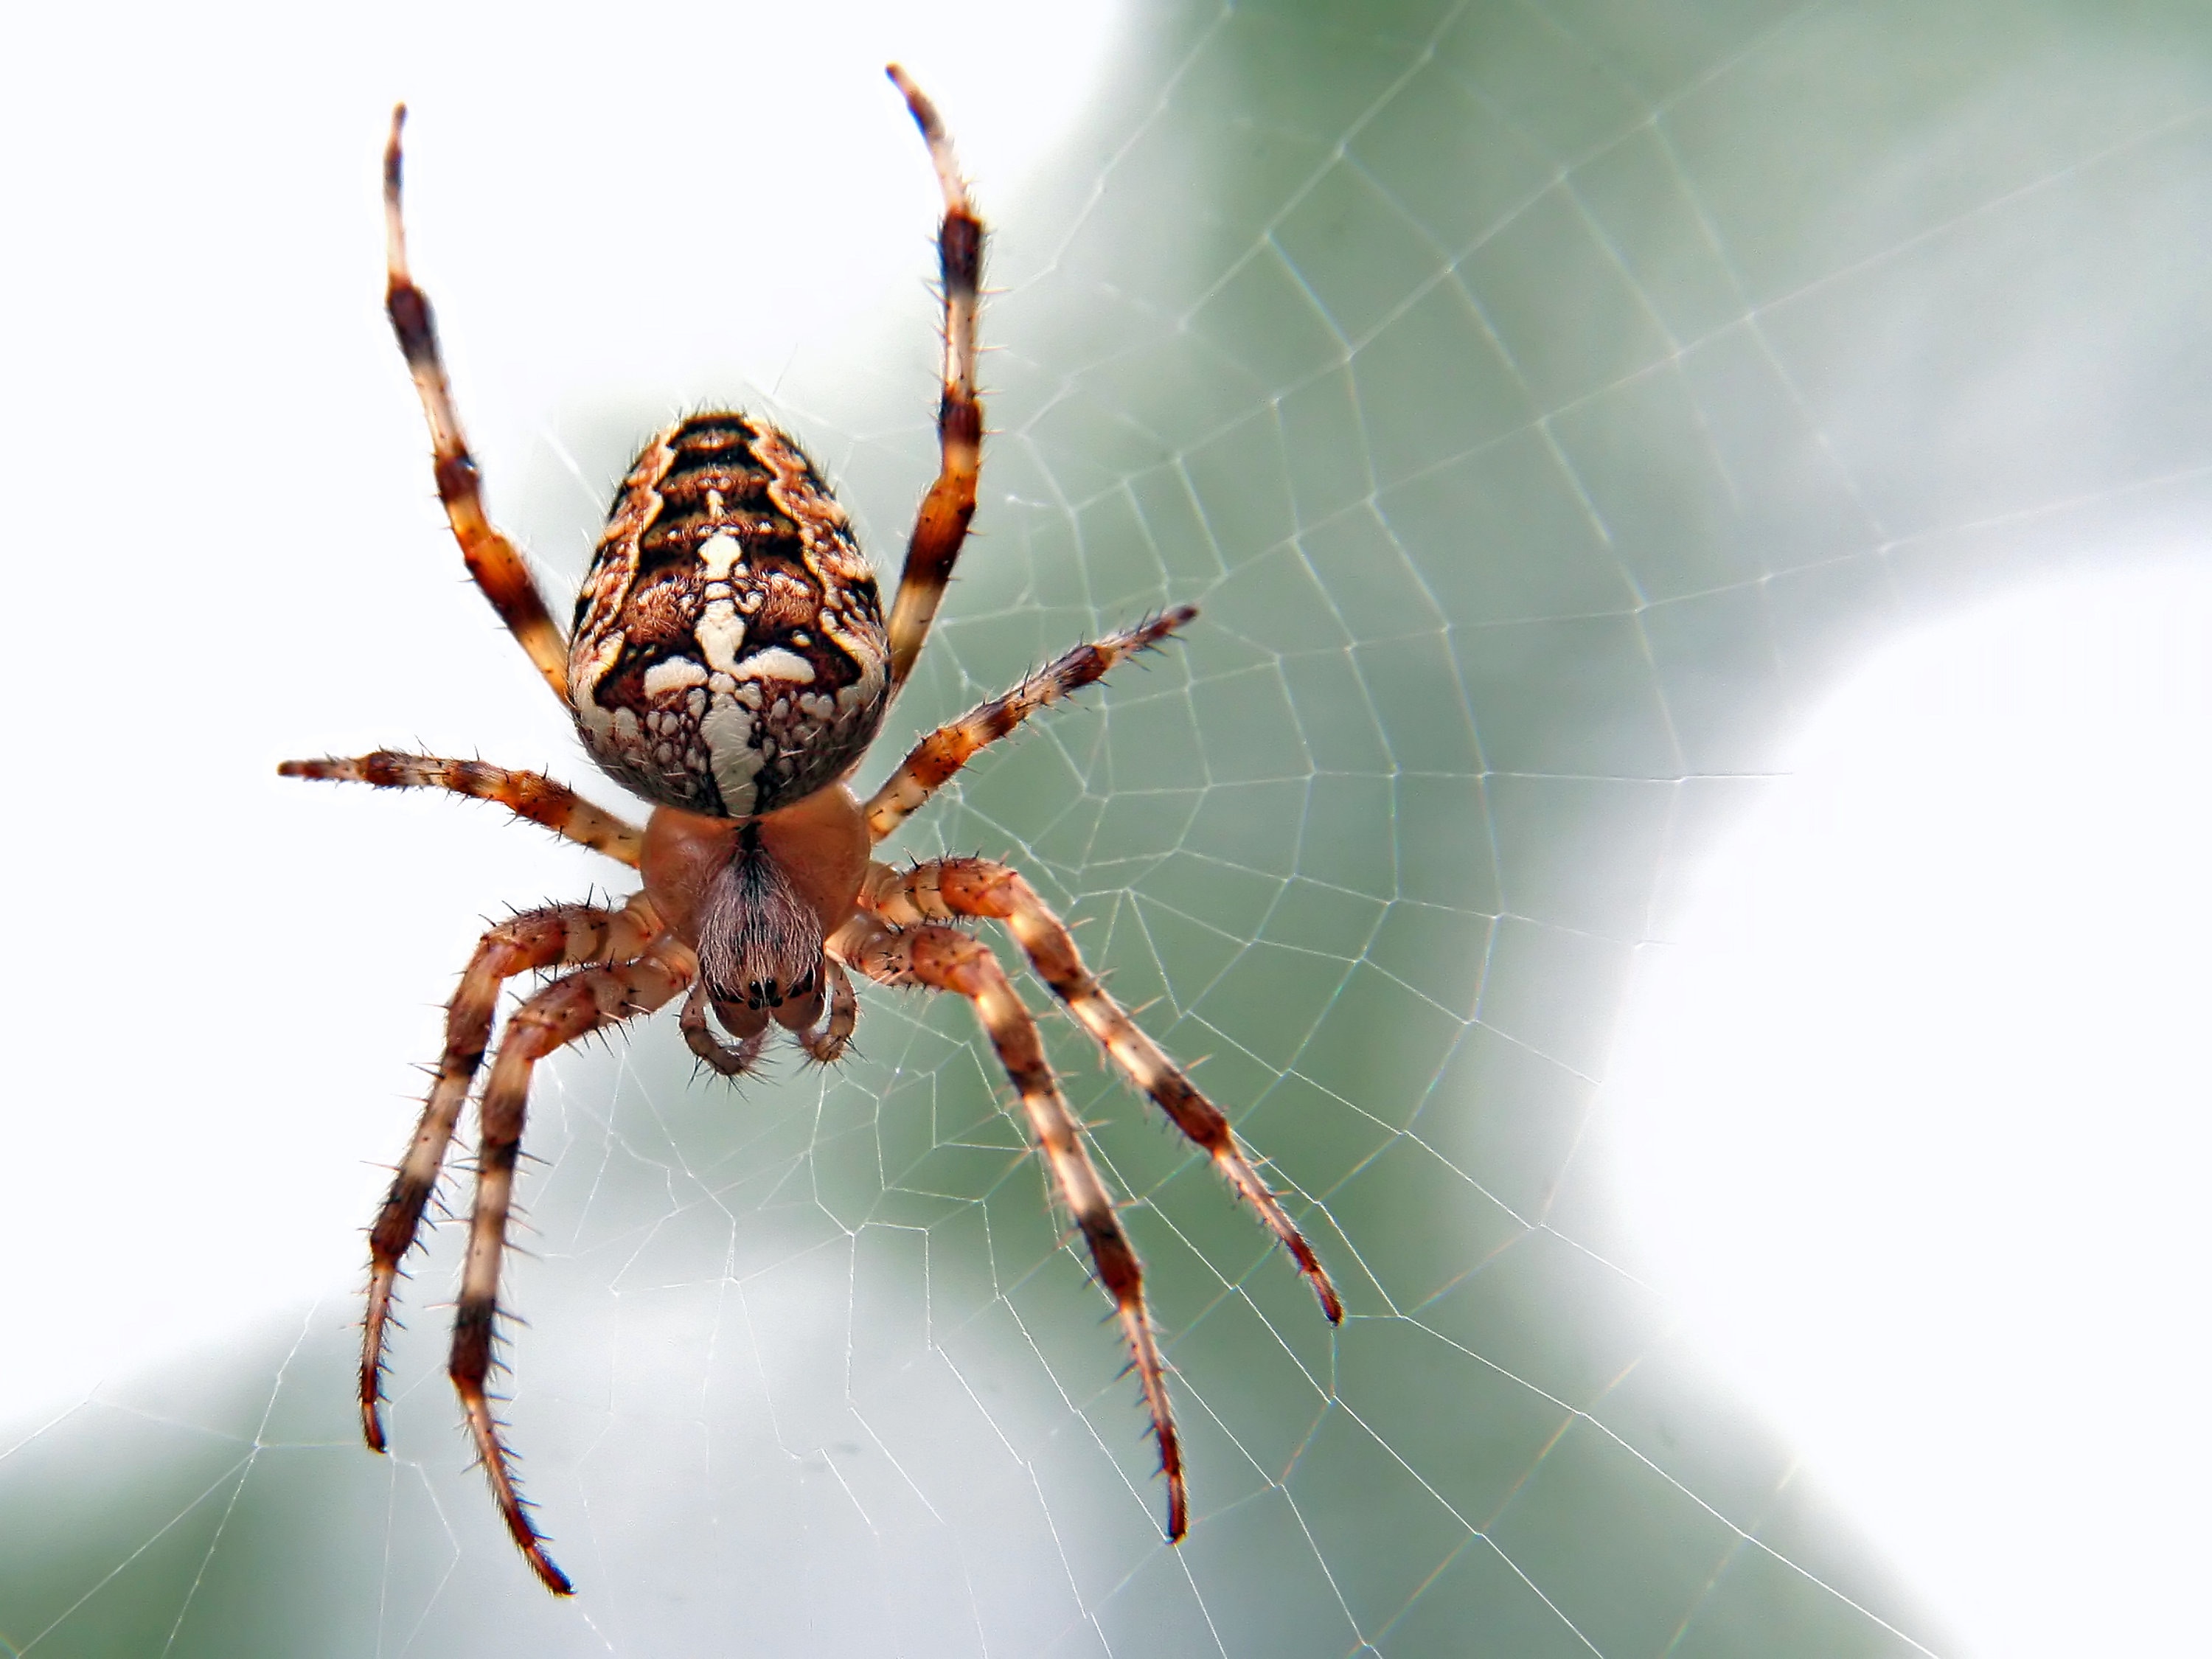 What are the characteristics of a spider with 8 legs?